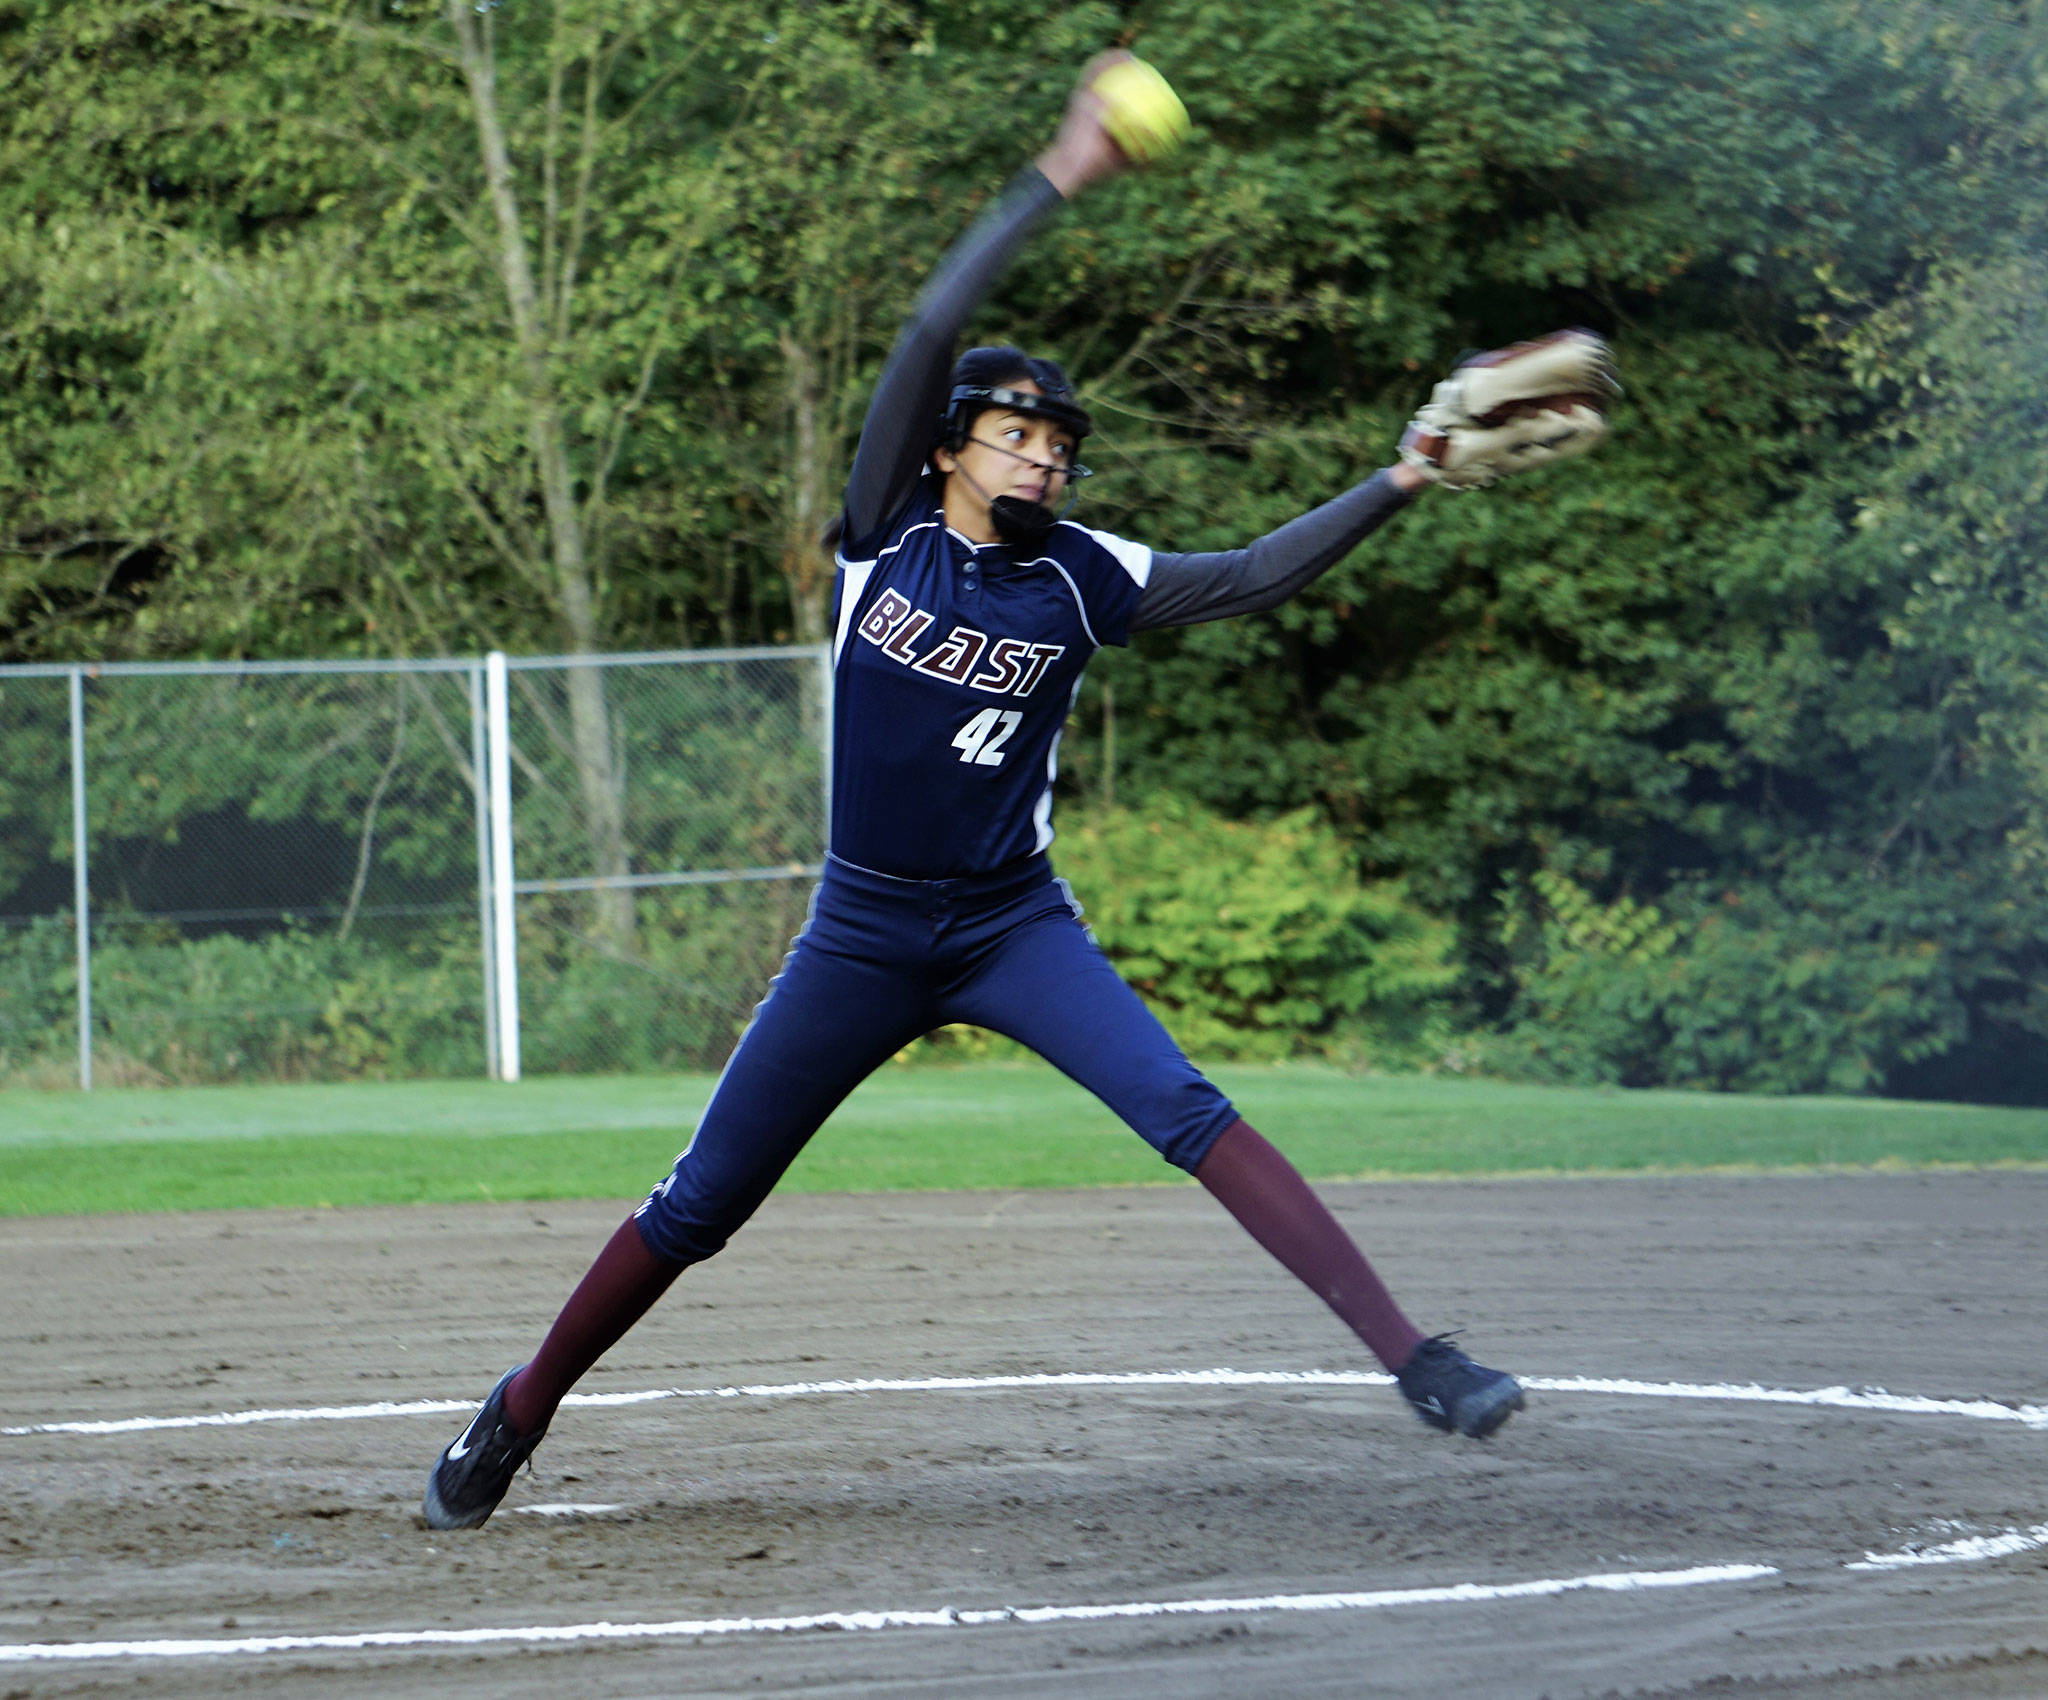 Macy Oliver delivers a pitch for the Bellevue Blast last summer. (Photo by Gerry Oliver)